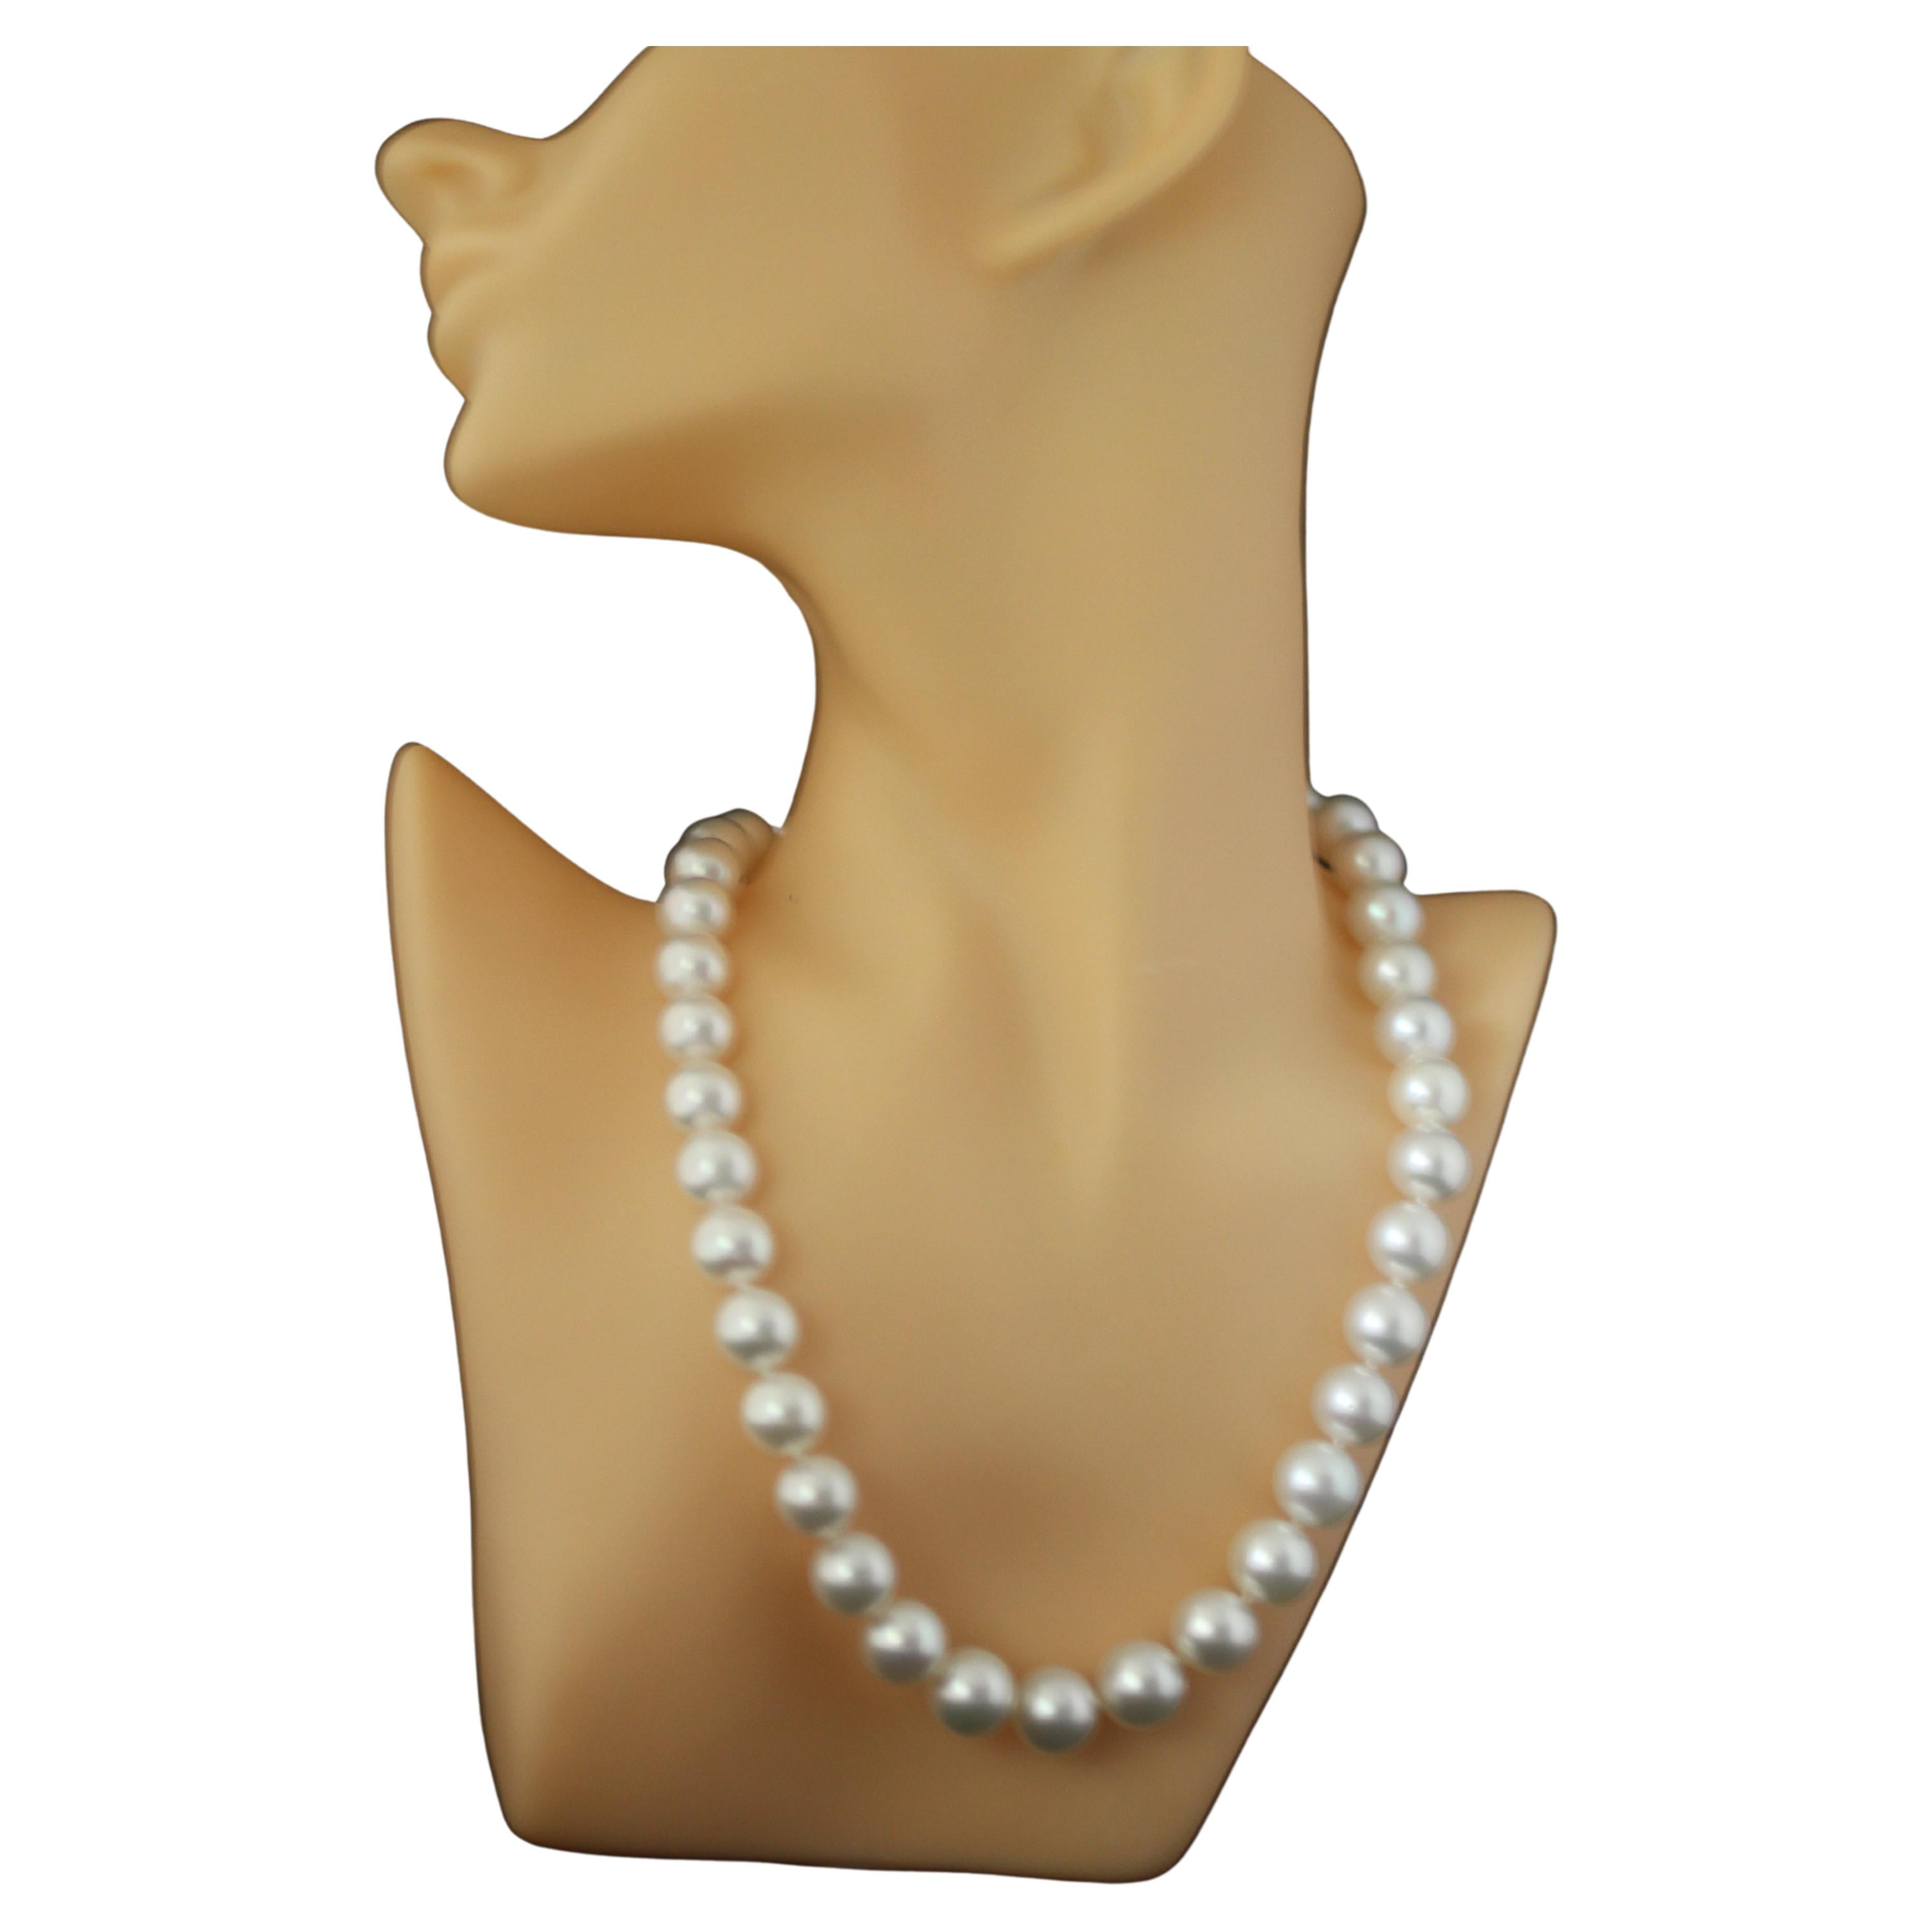 Hakimoto By Jewel Of Ocean 18K South Sea Strand Necklace
18K White Gold  
Weight (g): 92.2
Cultured South Sea Pearl 
Pearl Size: 13X11mm 
Pearl Shape: Round 
Body color: Pinkish White 
Orient: Very Good
Luster: Very Good 
Surface: Eye Clean
Nacre: